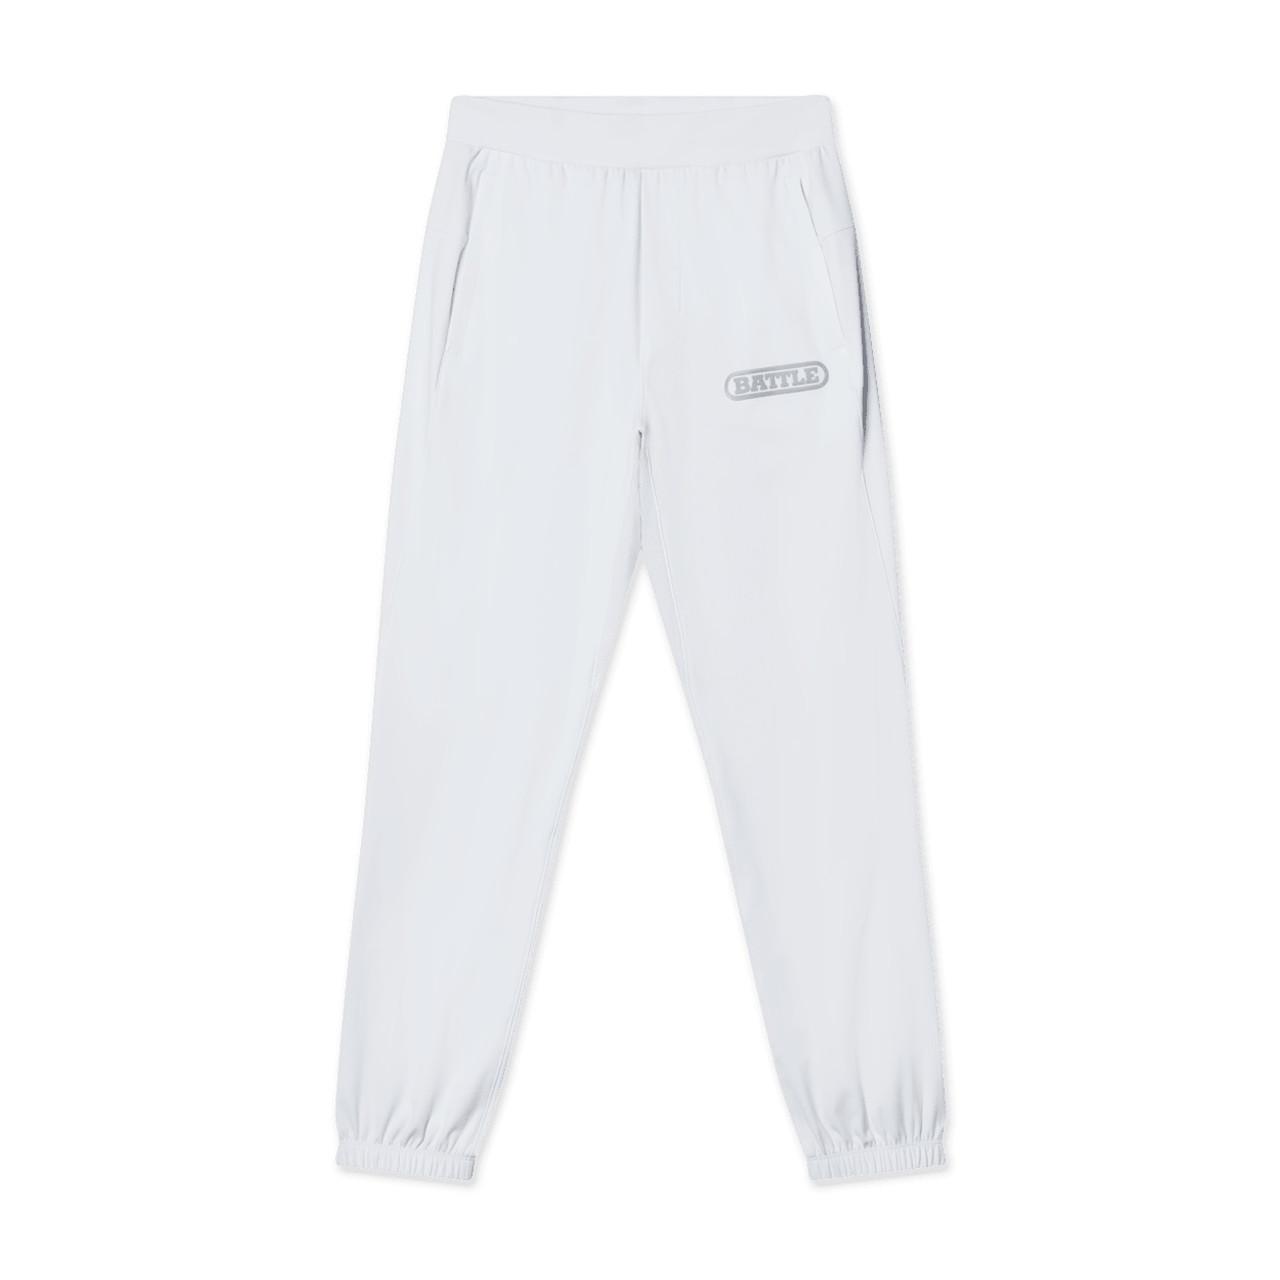 Buy online Blue Color-blocked Full Length Track Pant from Sports